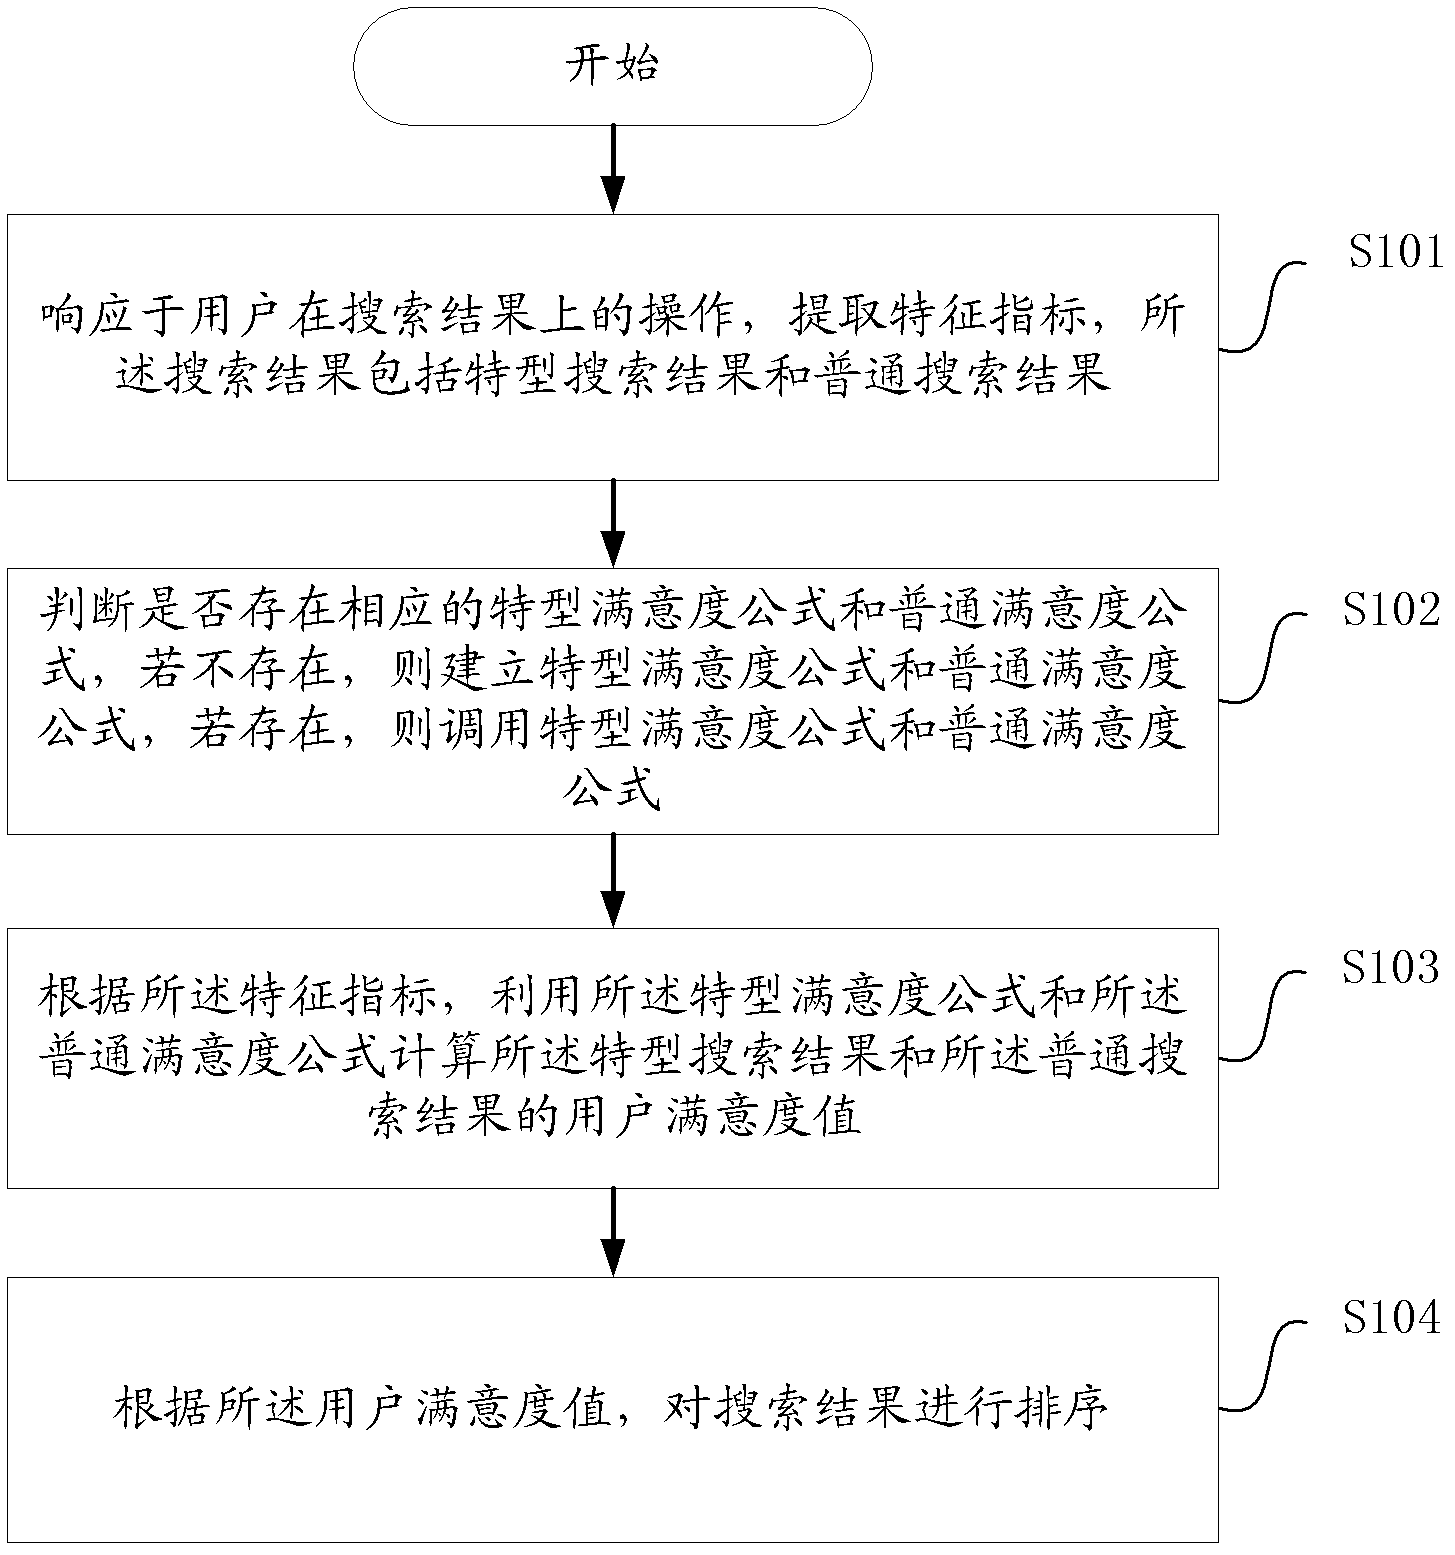 Method and system for sequencing search results